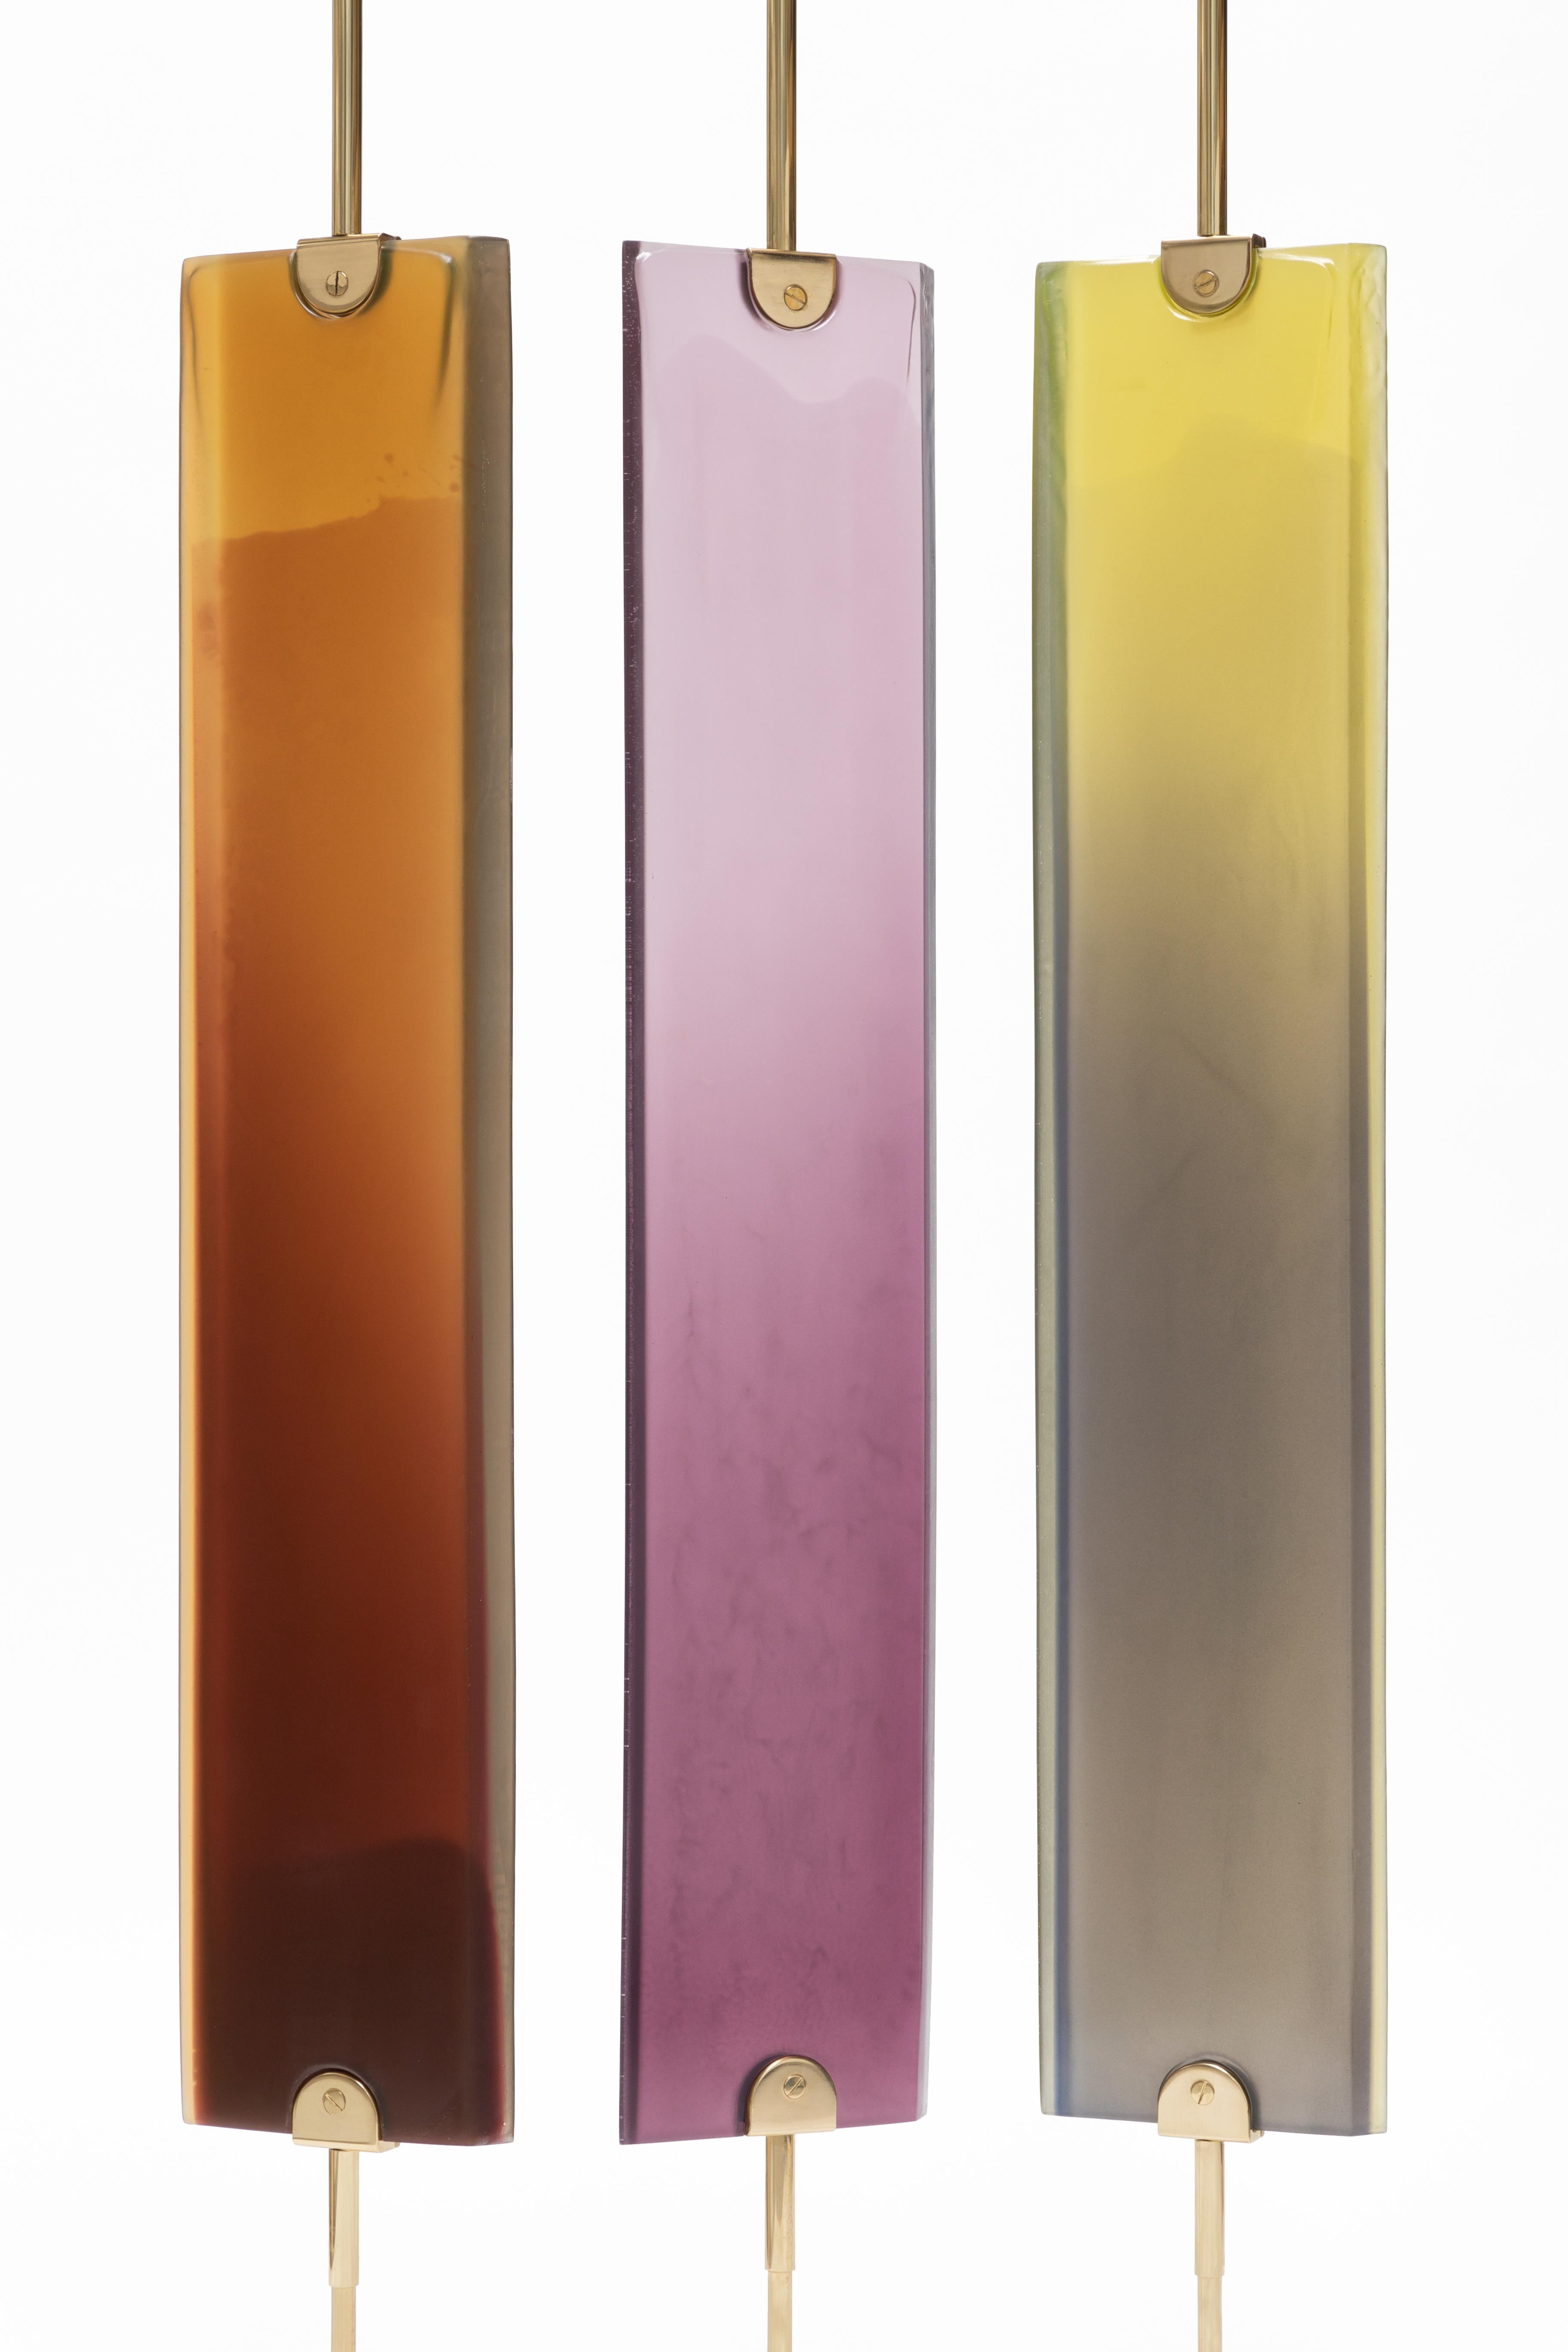 Contemporary Reverso Separè Violet by Draga&Aurel Resin and Brass, 21st Century For Sale